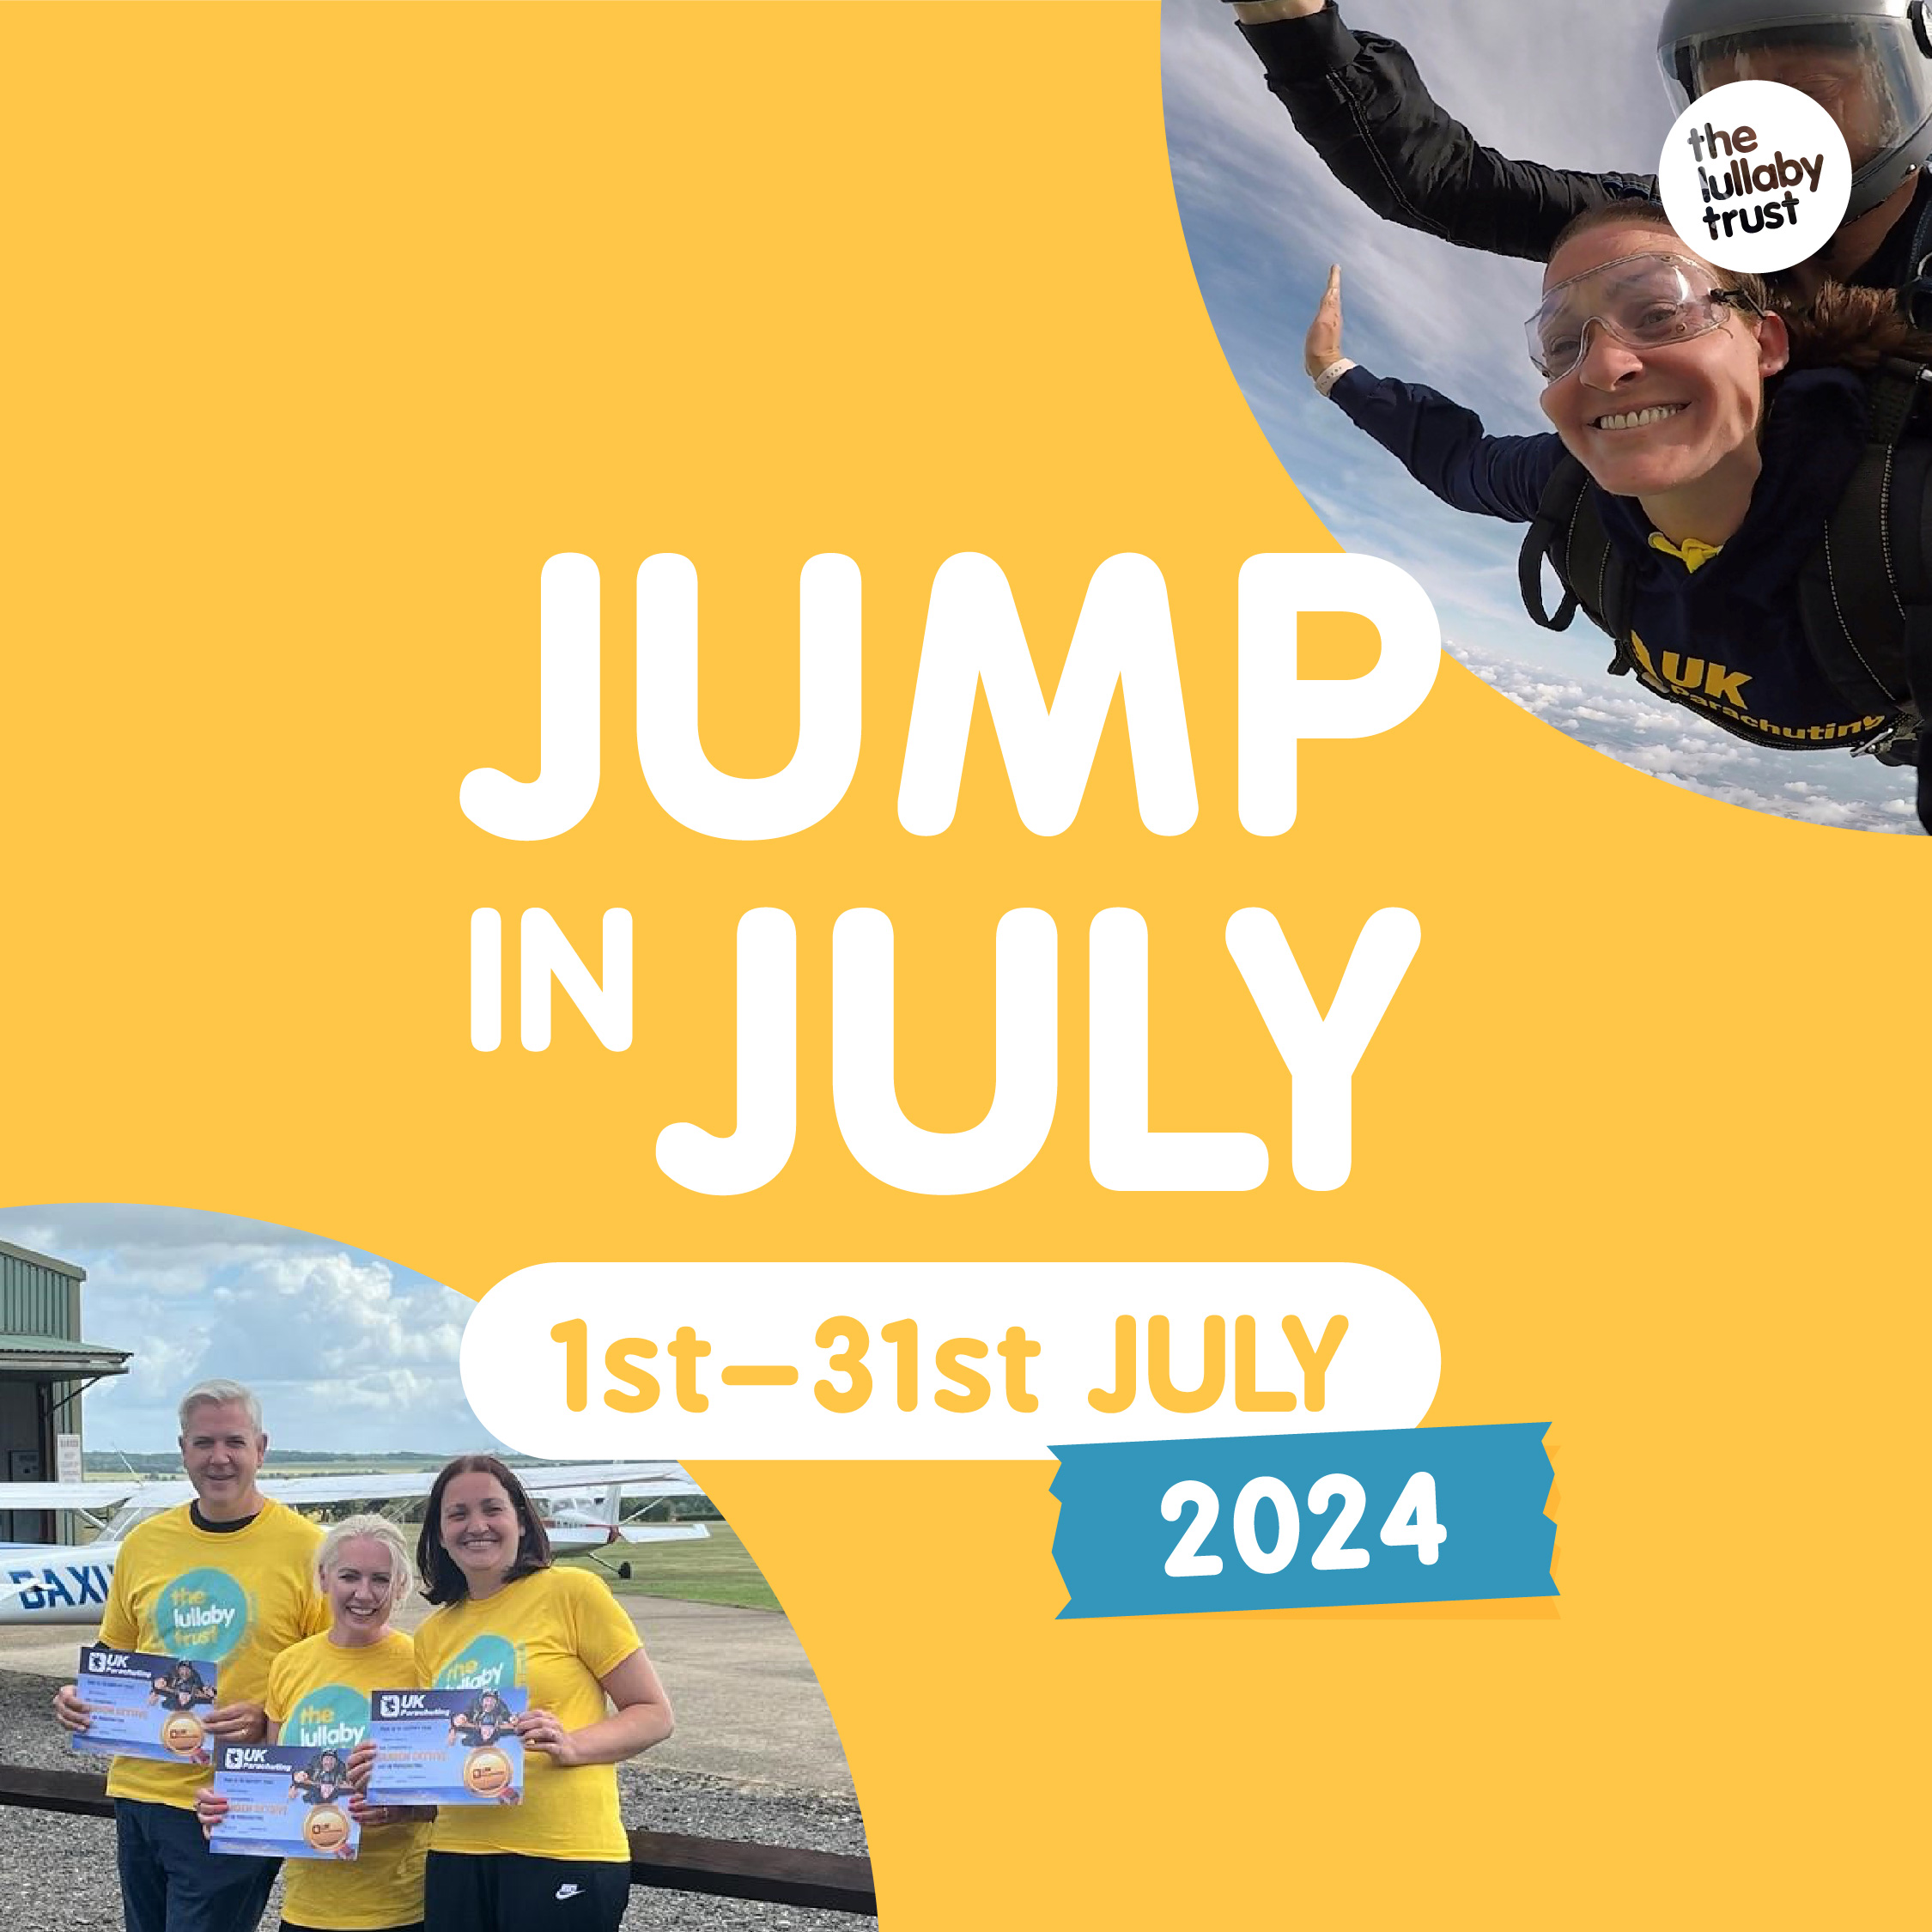 Yellow square image. The text reads 'Jump in July'